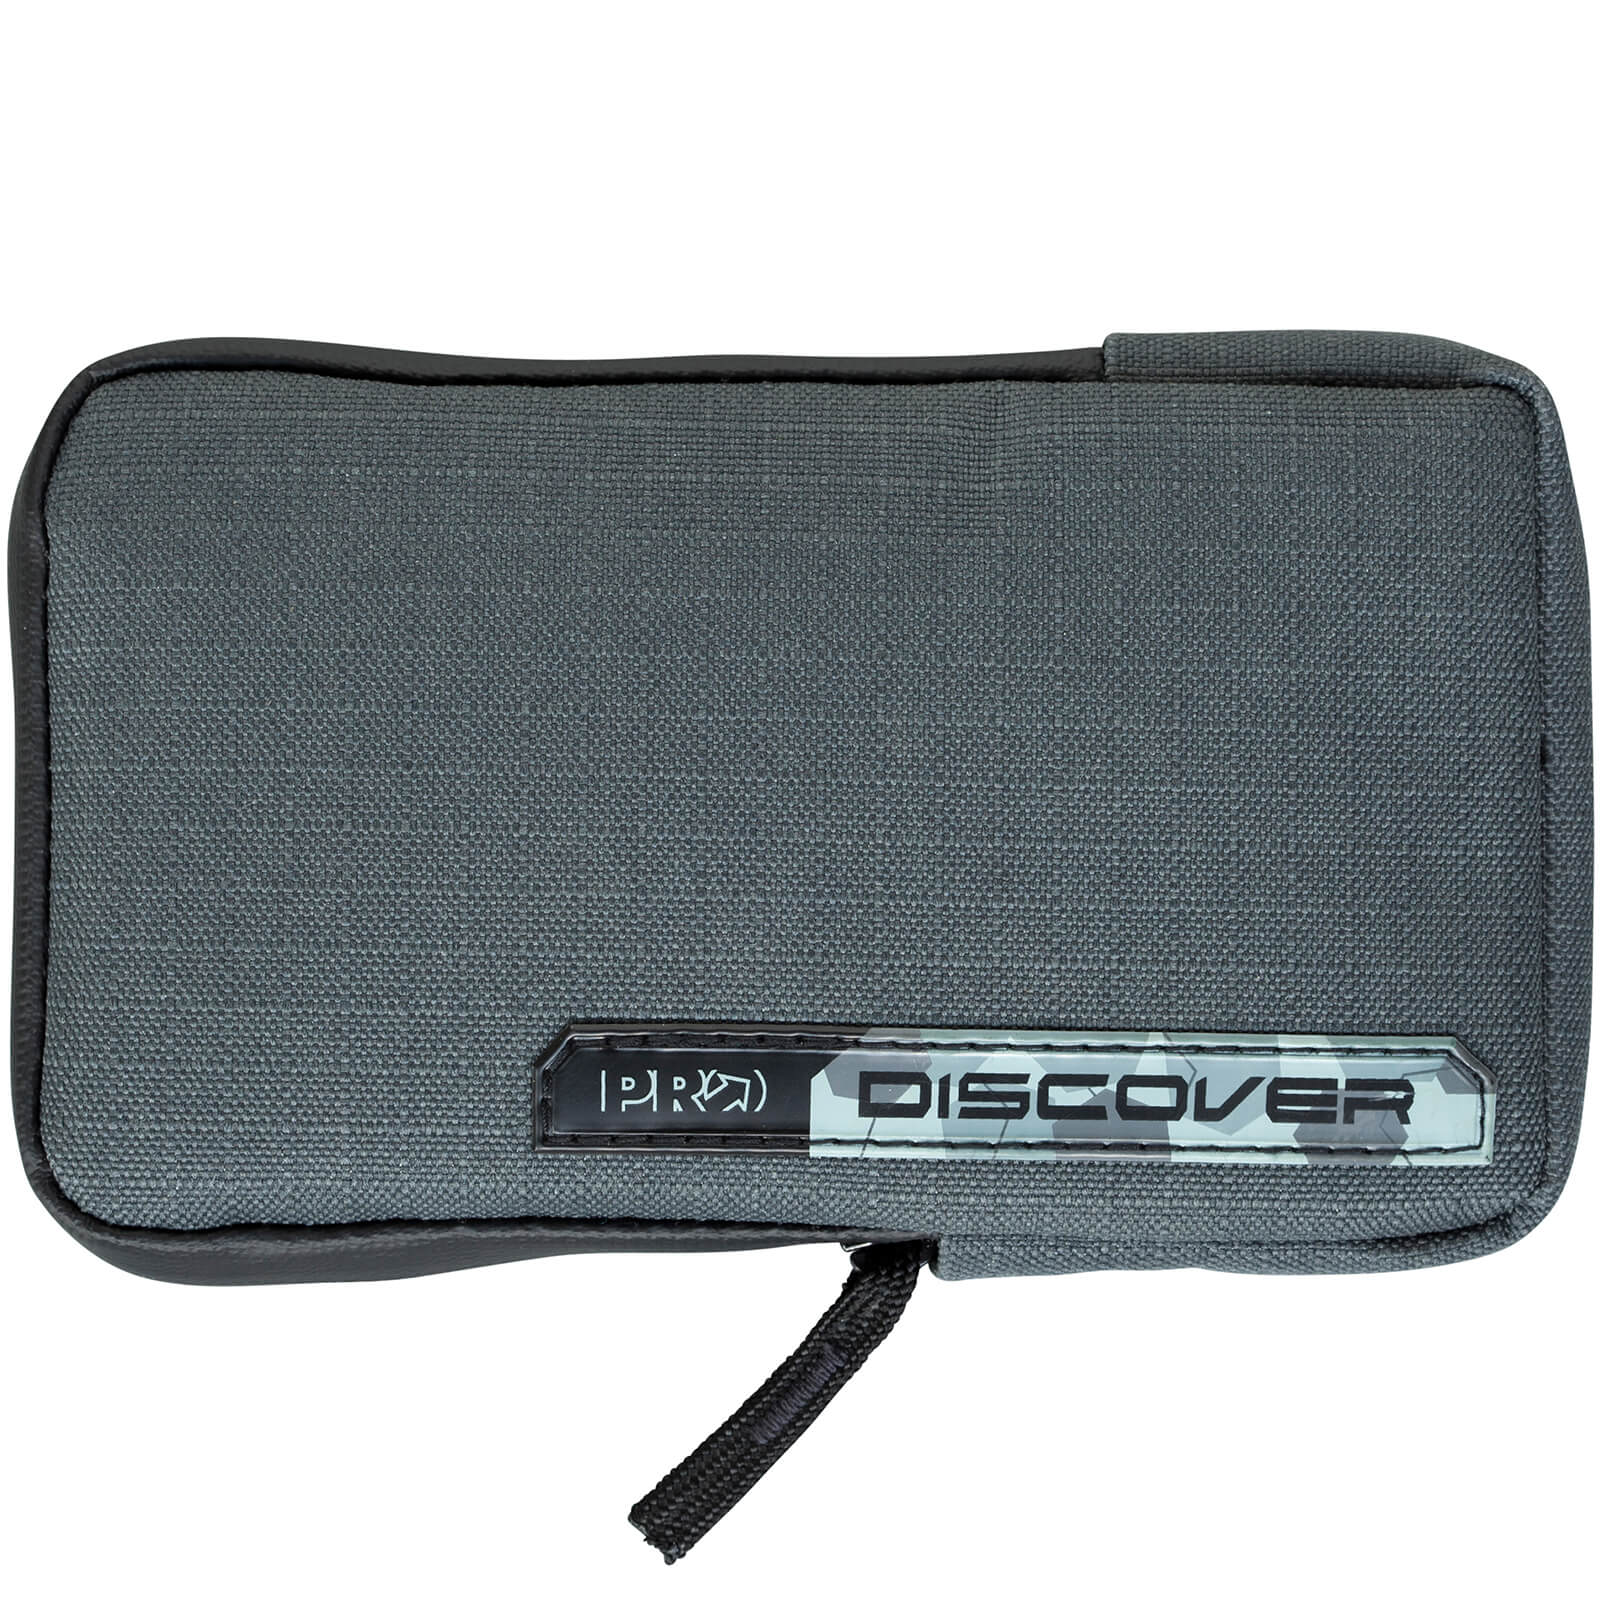 PRO Discover Phone Pouch